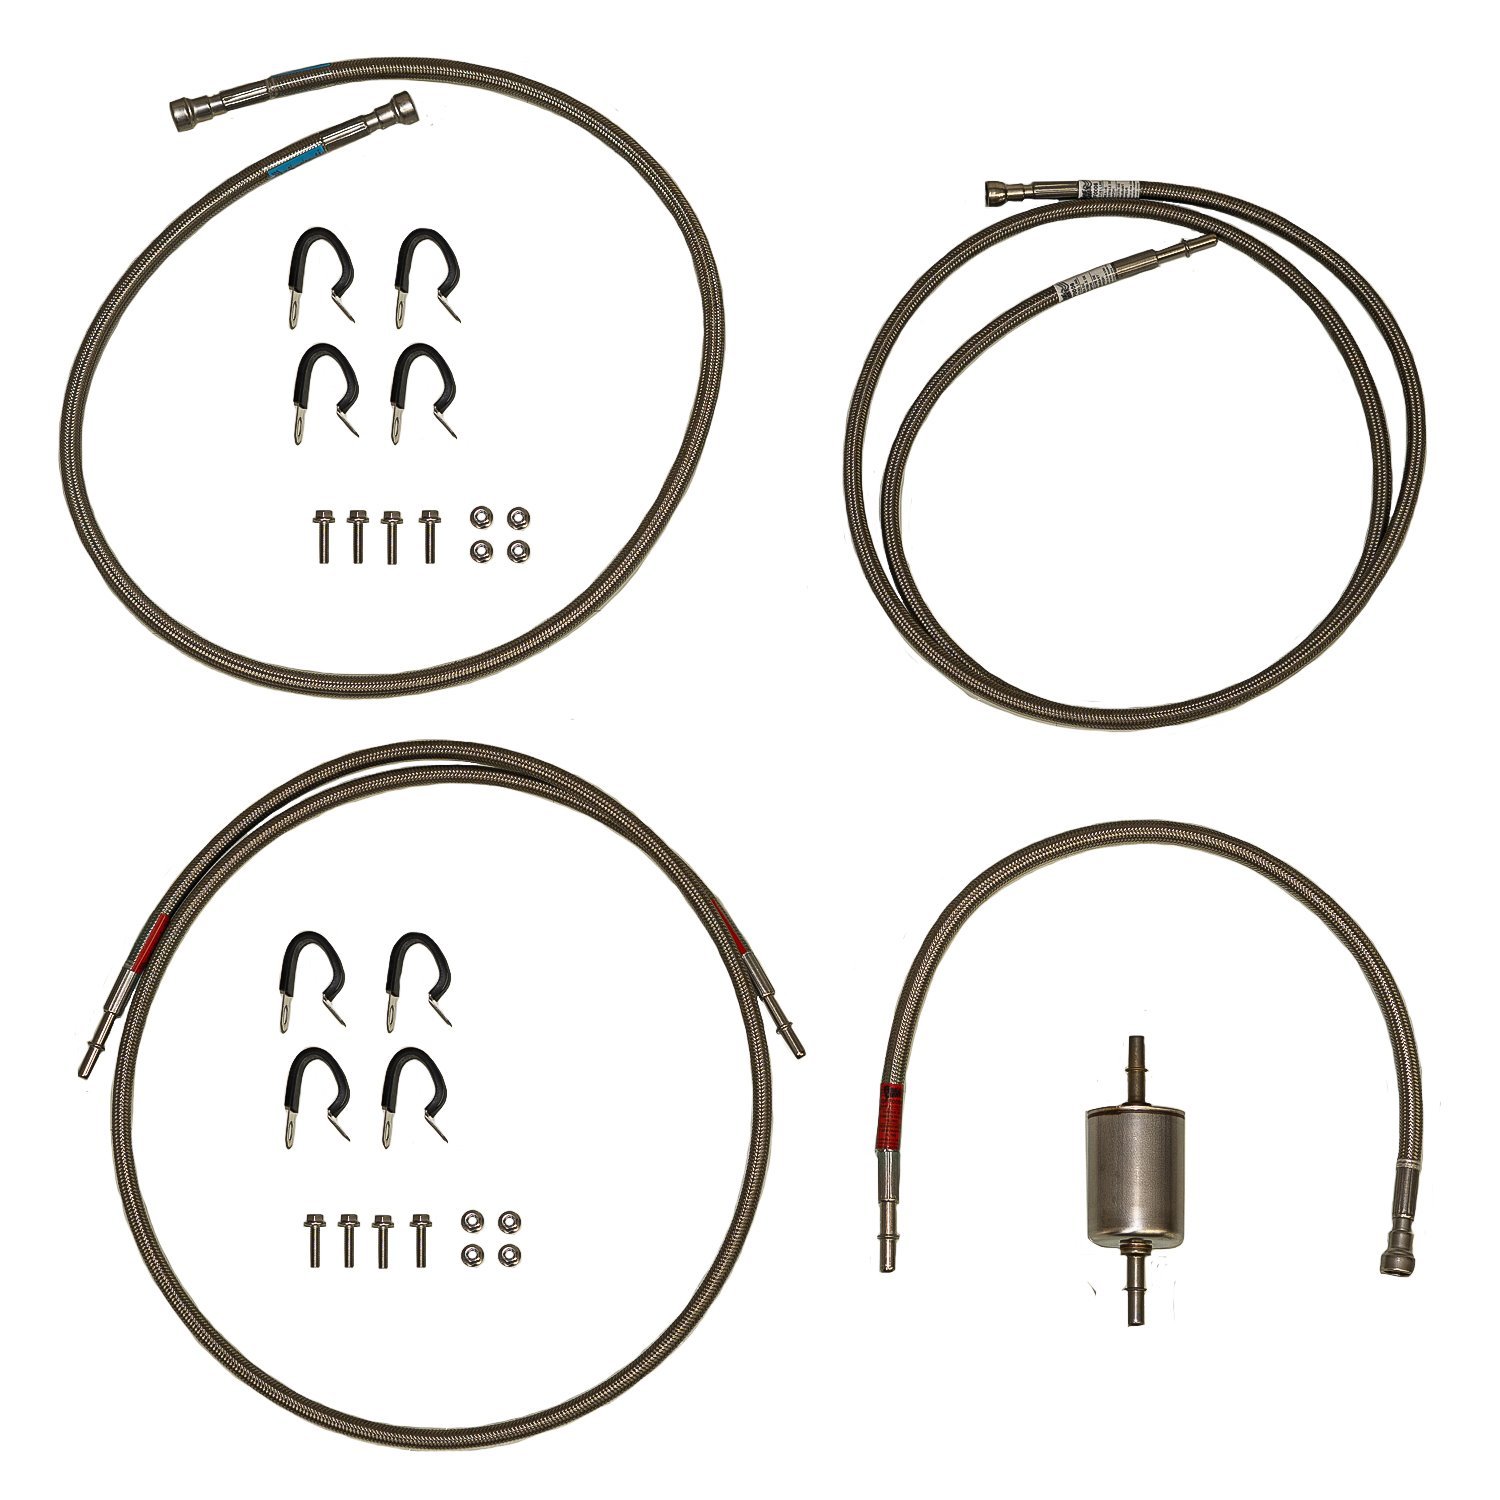 Quick-Fix Complete Fuel Line Kit for 2001-2003 GM 2500 HD, 3500 Regular Cab Trucks w/Gas Engine [Braided Stainless]